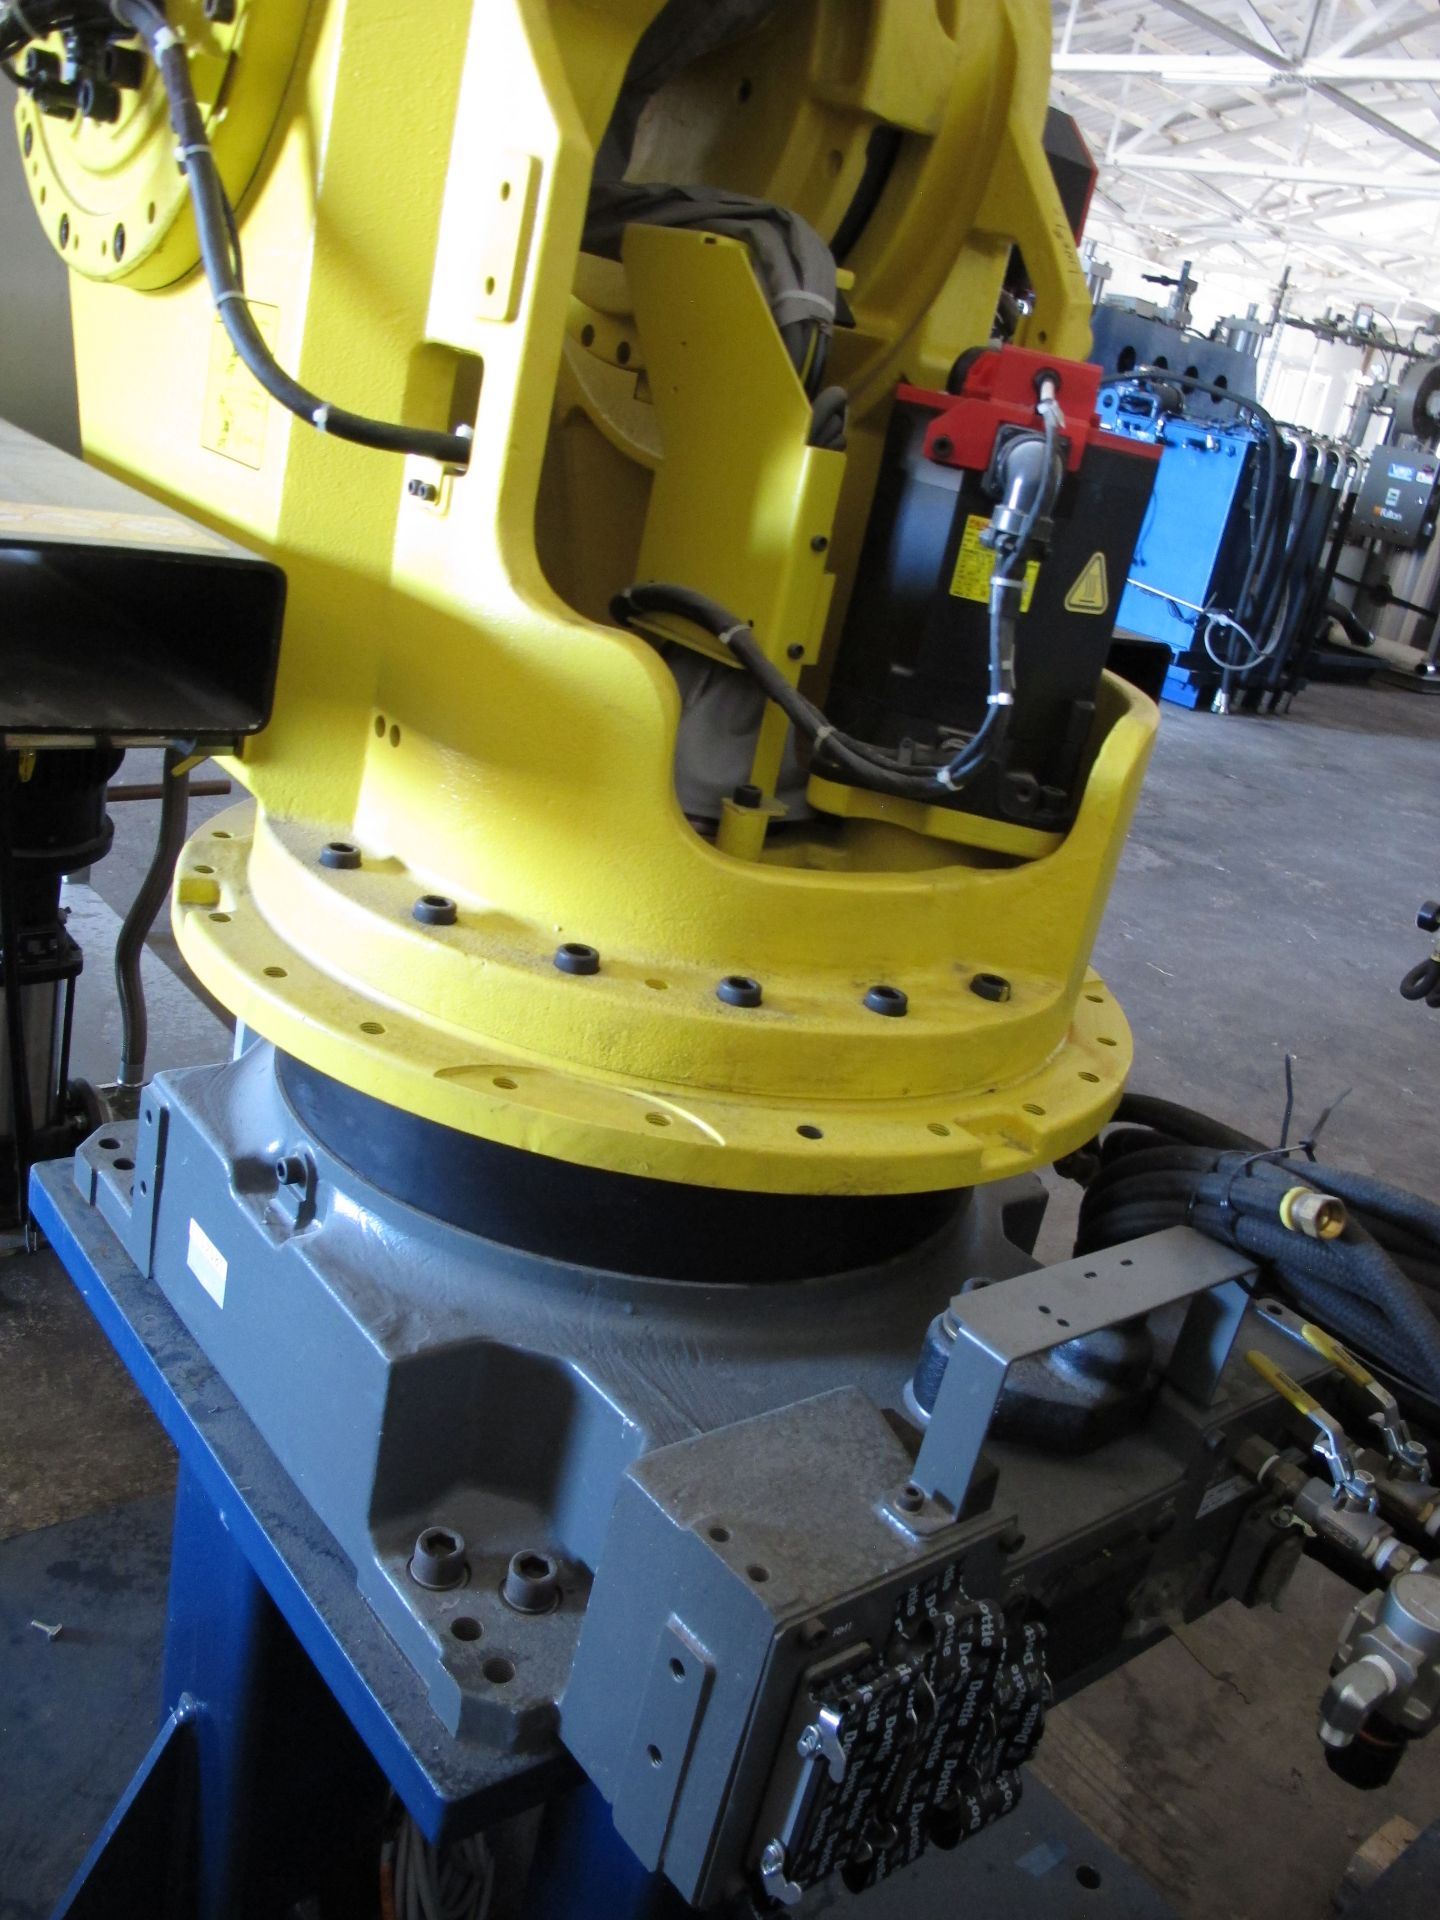 FANUC INDUSTRIAL JOINTED ARM ROBOT, MODEL M-900iA 350, TYPE A05B-1327-B501, MANUFACTURED MAY 2010 ( - Image 4 of 10